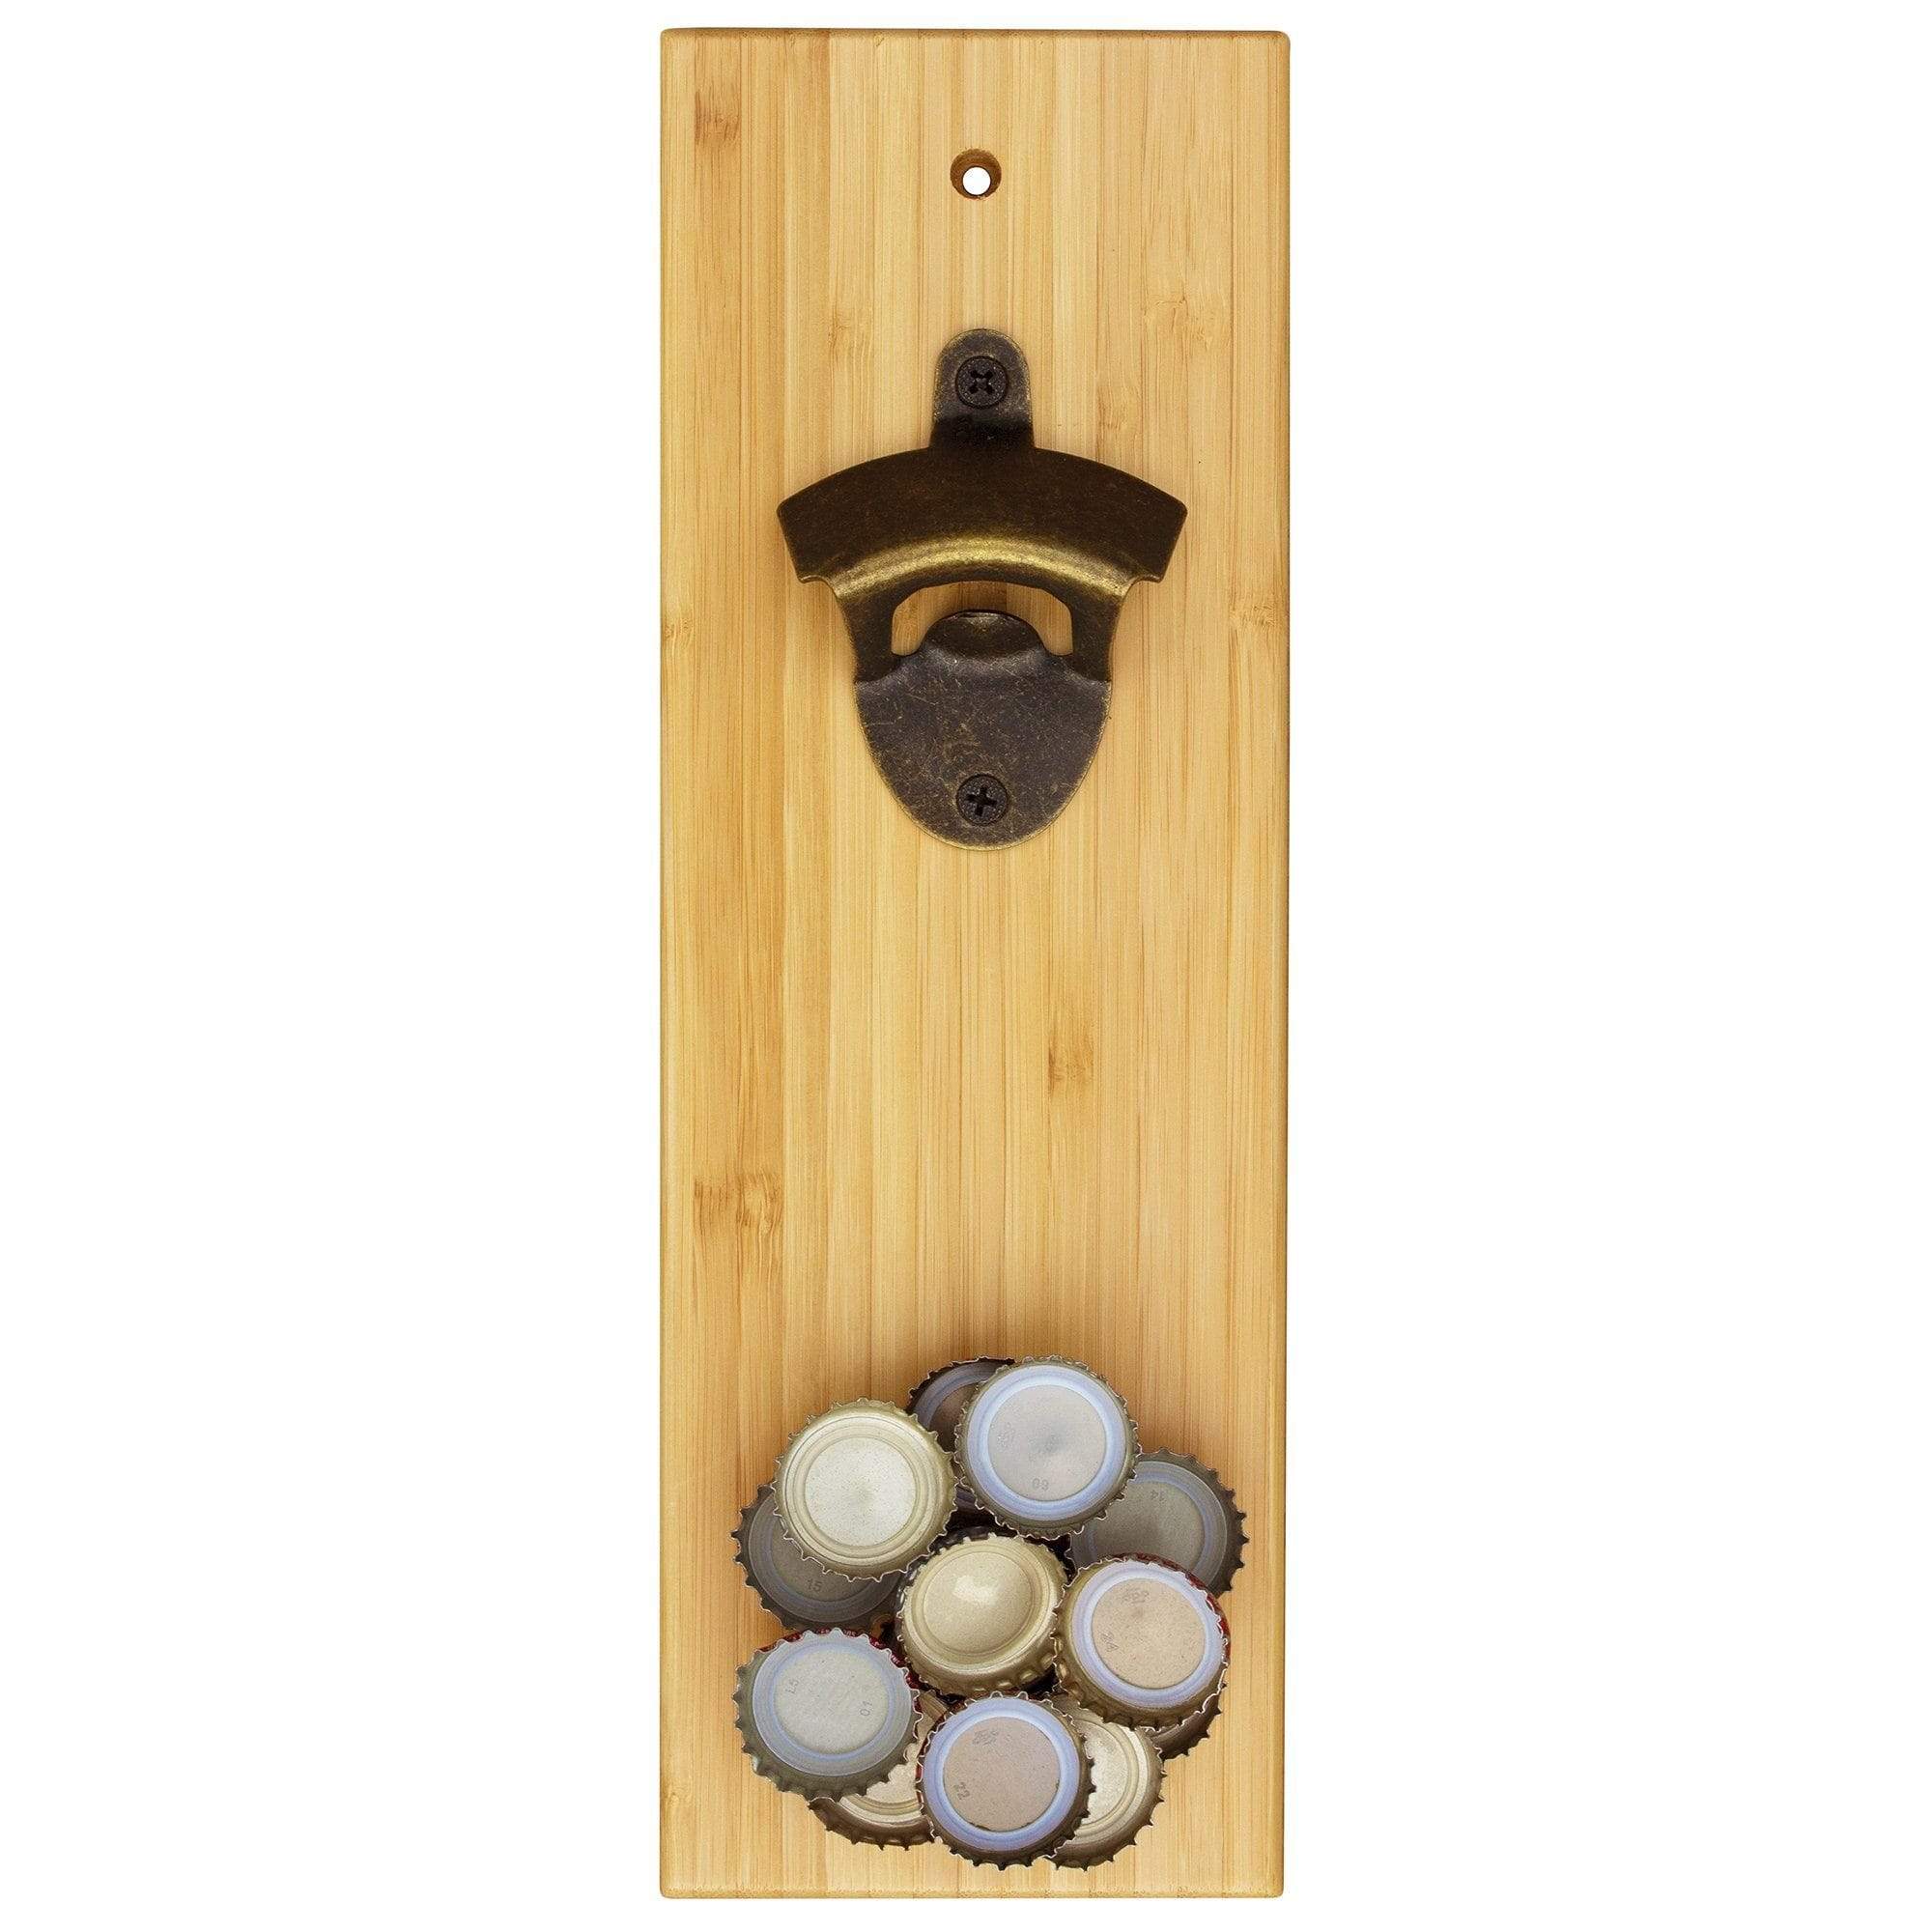 Totally Bamboo Wall Mounted Bottle Opener with Magnetic Bottle Cap Catcher